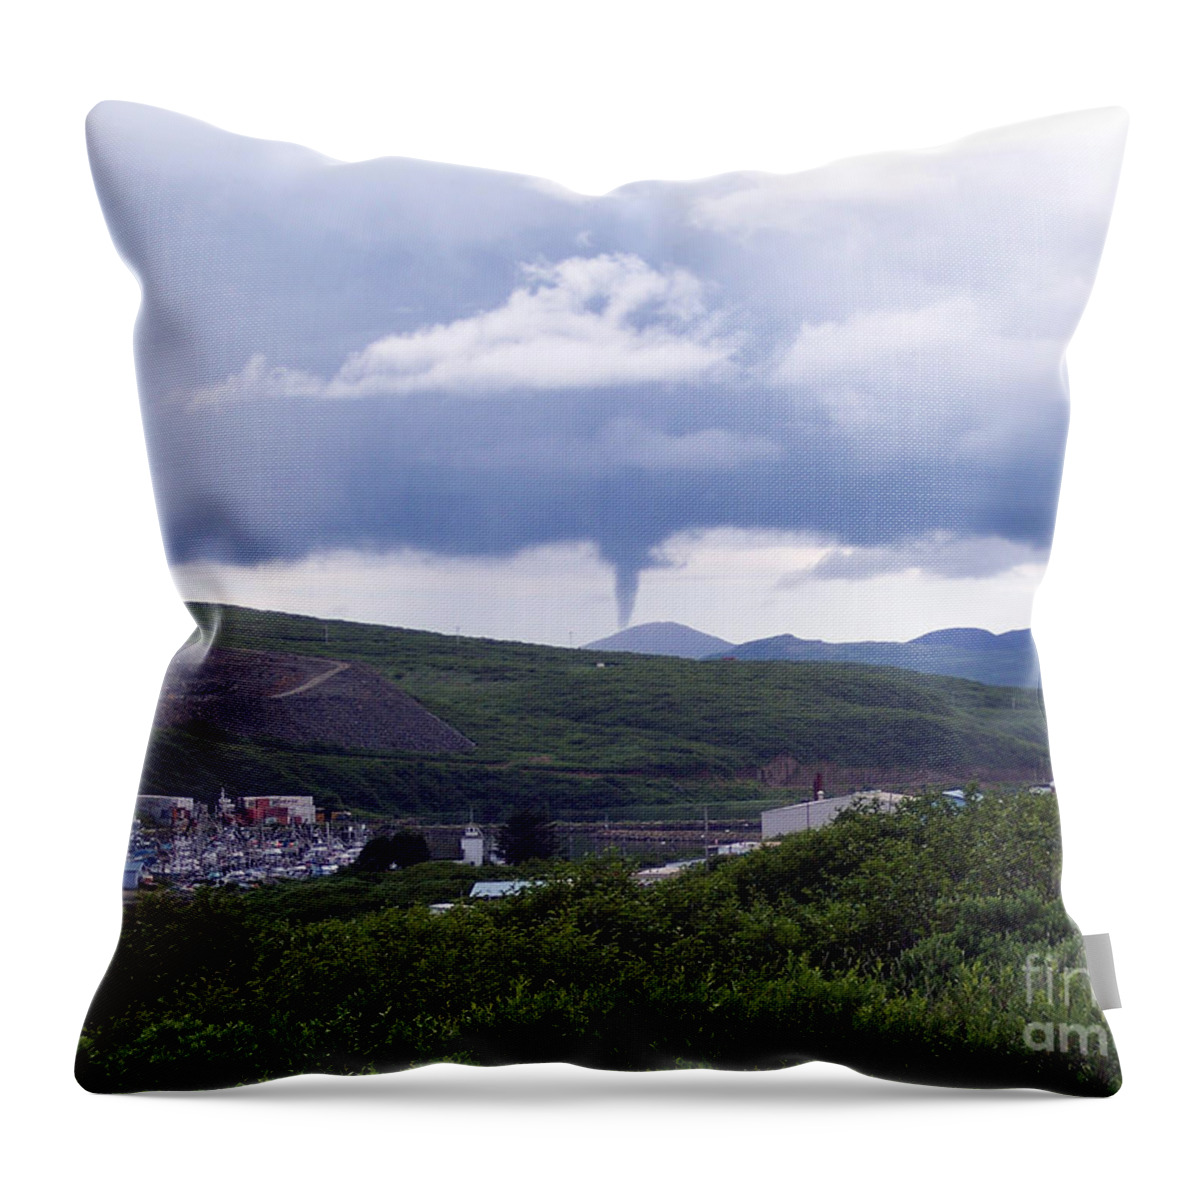 Science Throw Pillow featuring the photograph Tornado In Alaska, 2005 by Science Source